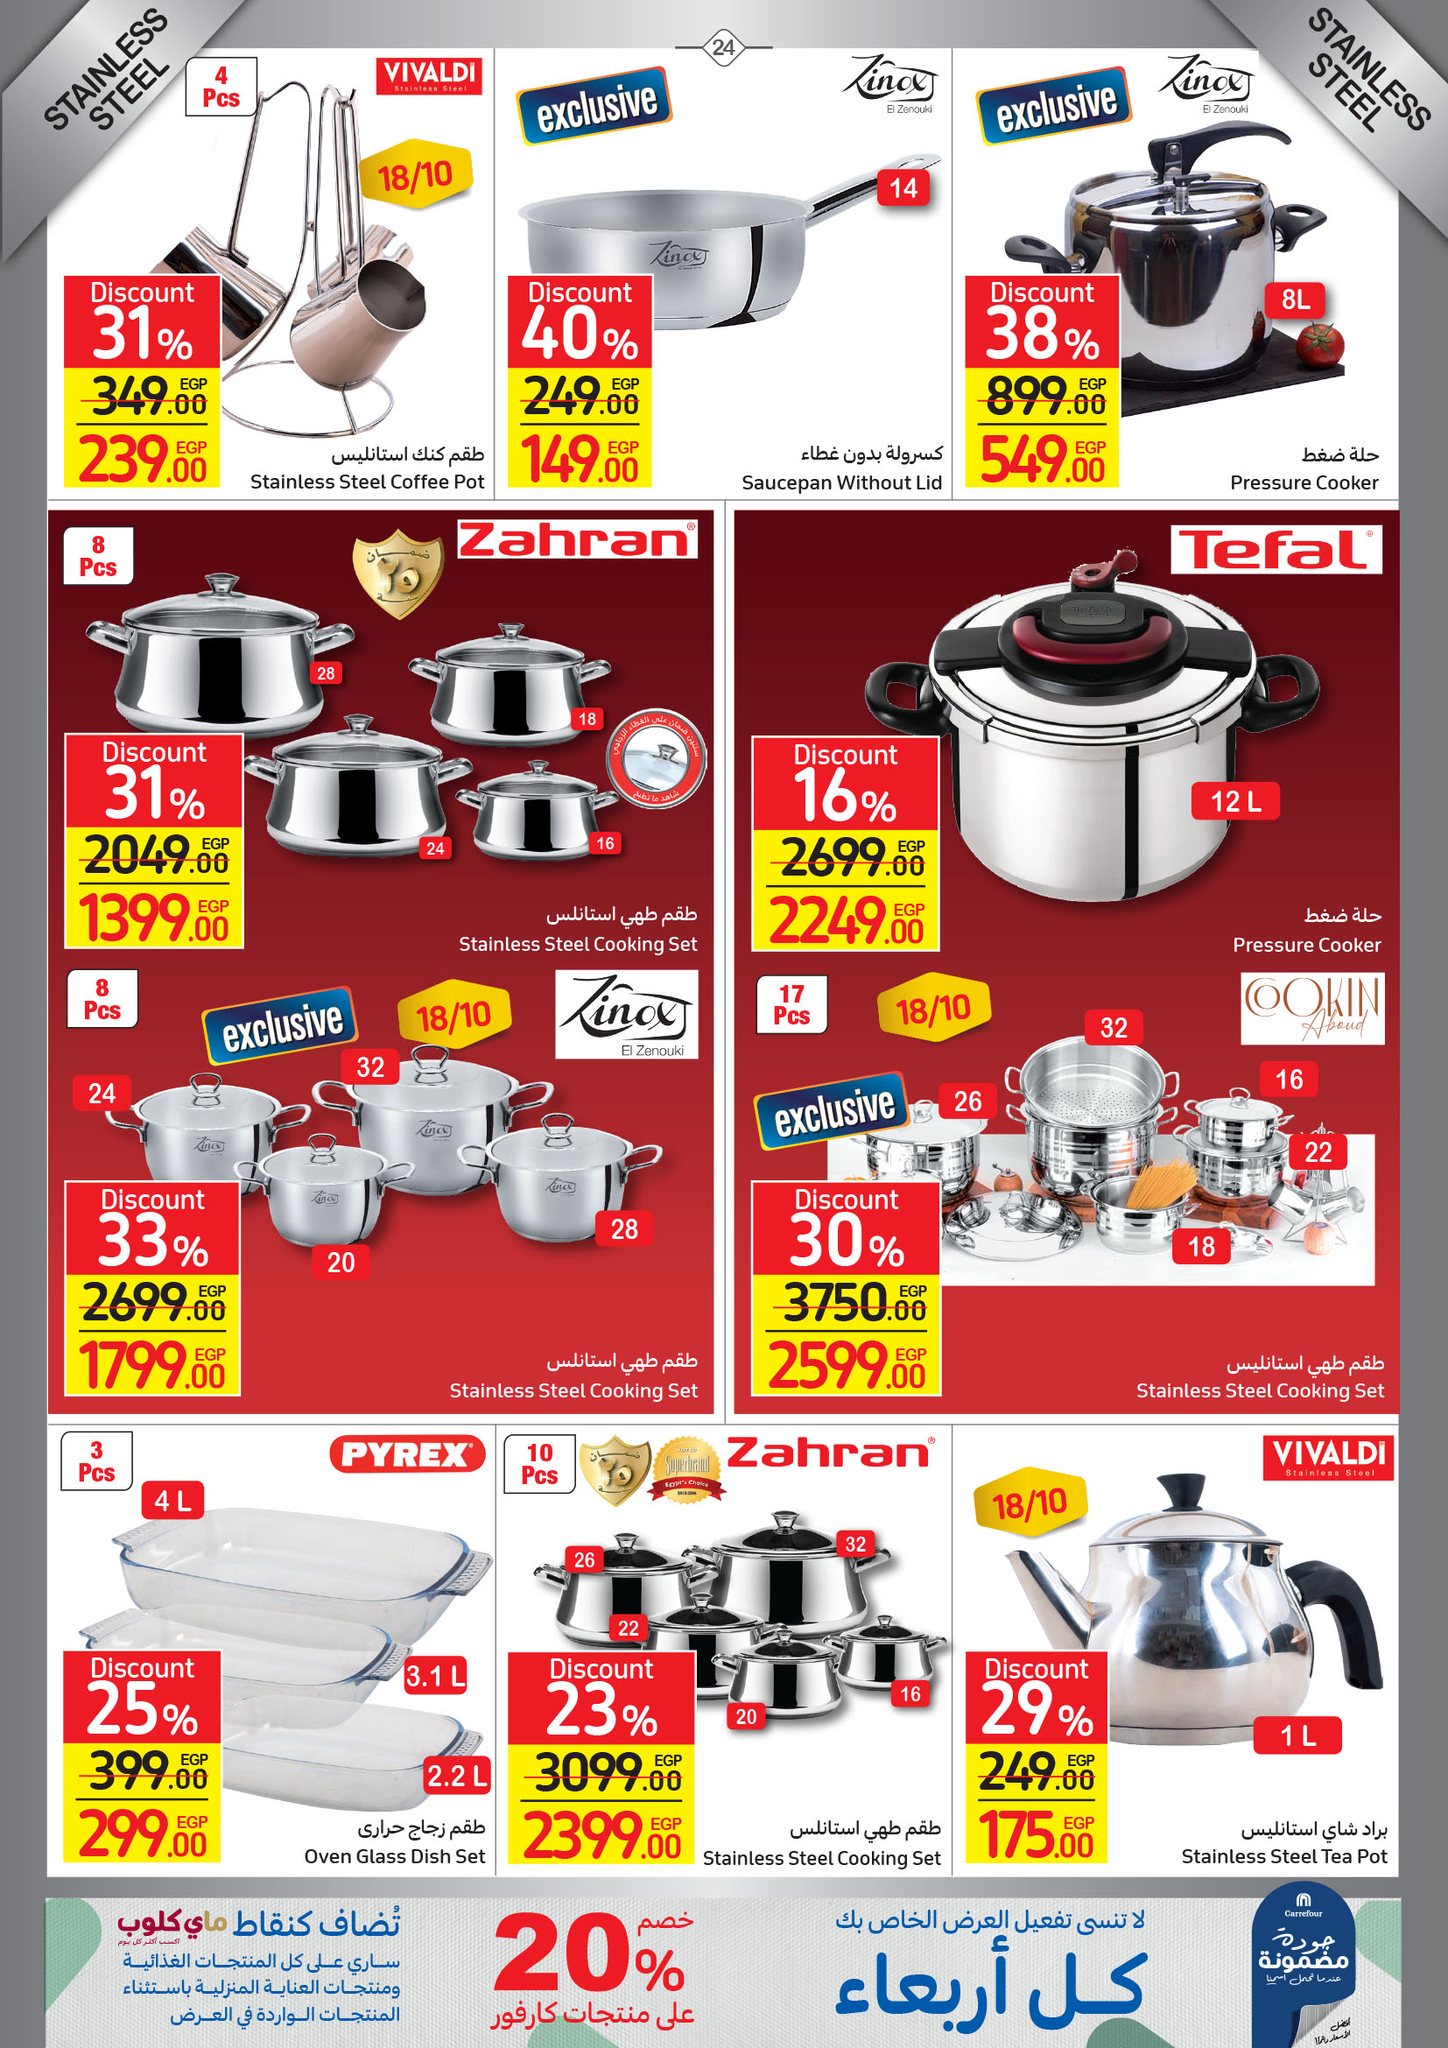 Watch the latest Carrefour half price offers "Last Chance Offer" until December 4th, 24